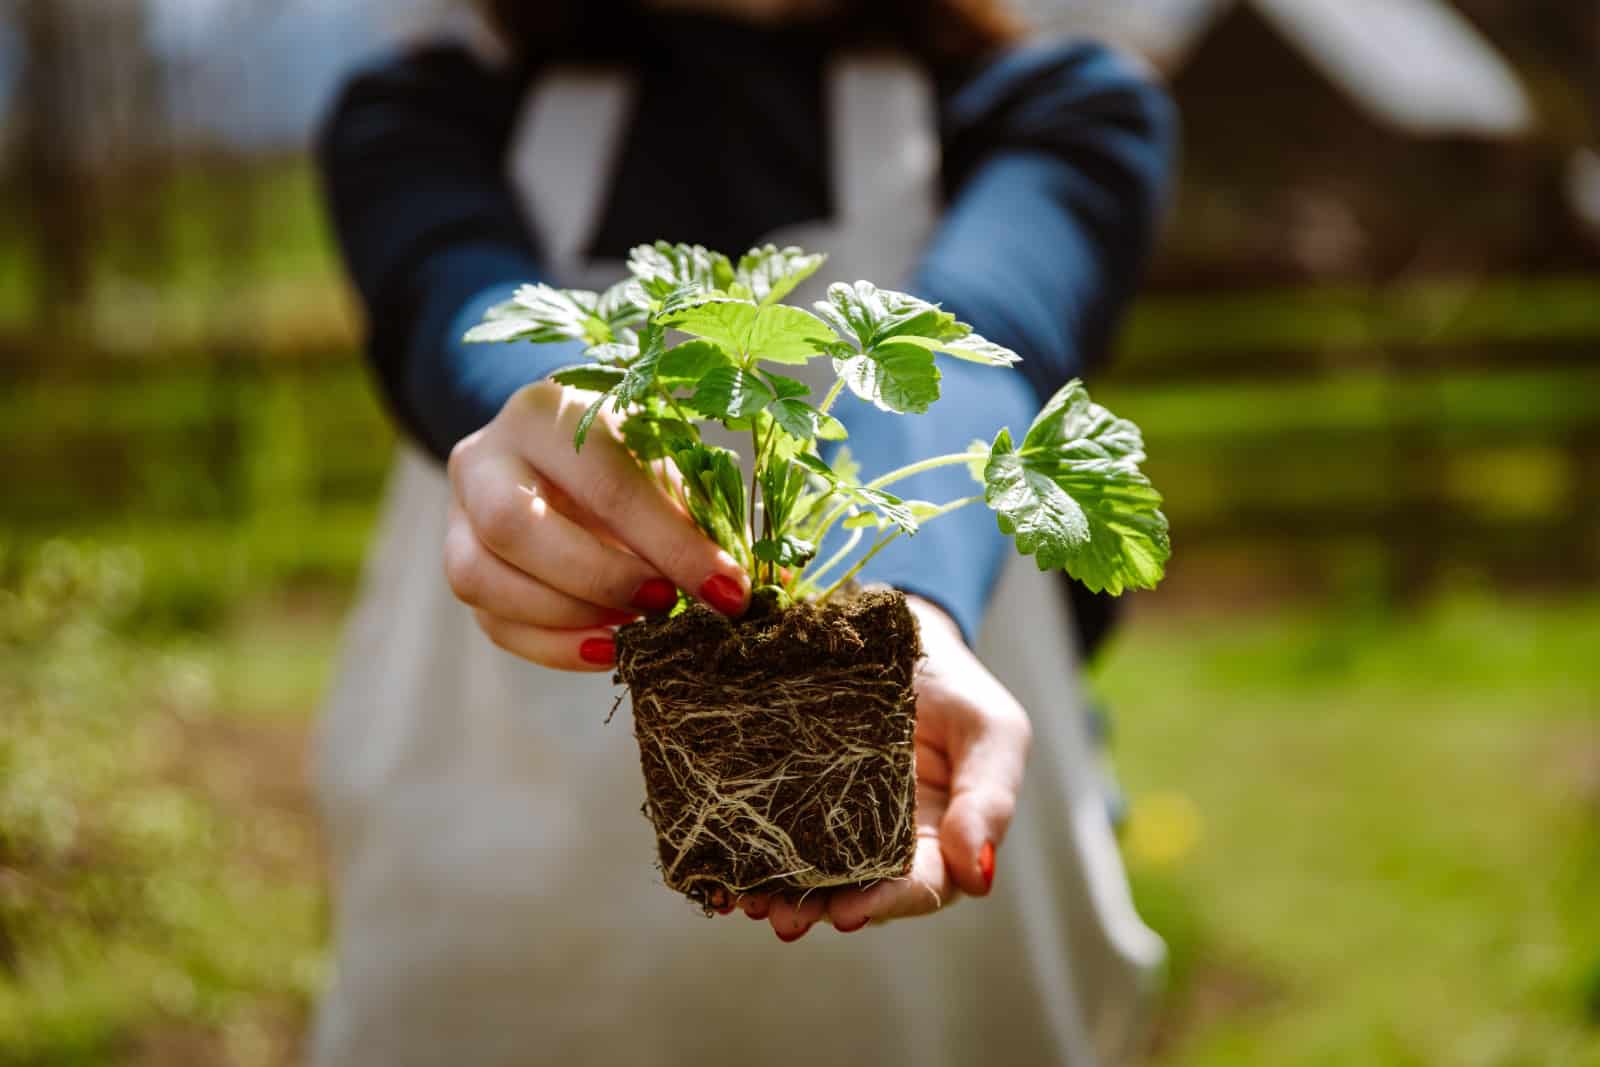 Follow These 11 Pro Tips For Transplanting Seedlings Outside And Enjoy Watching Them Thrive